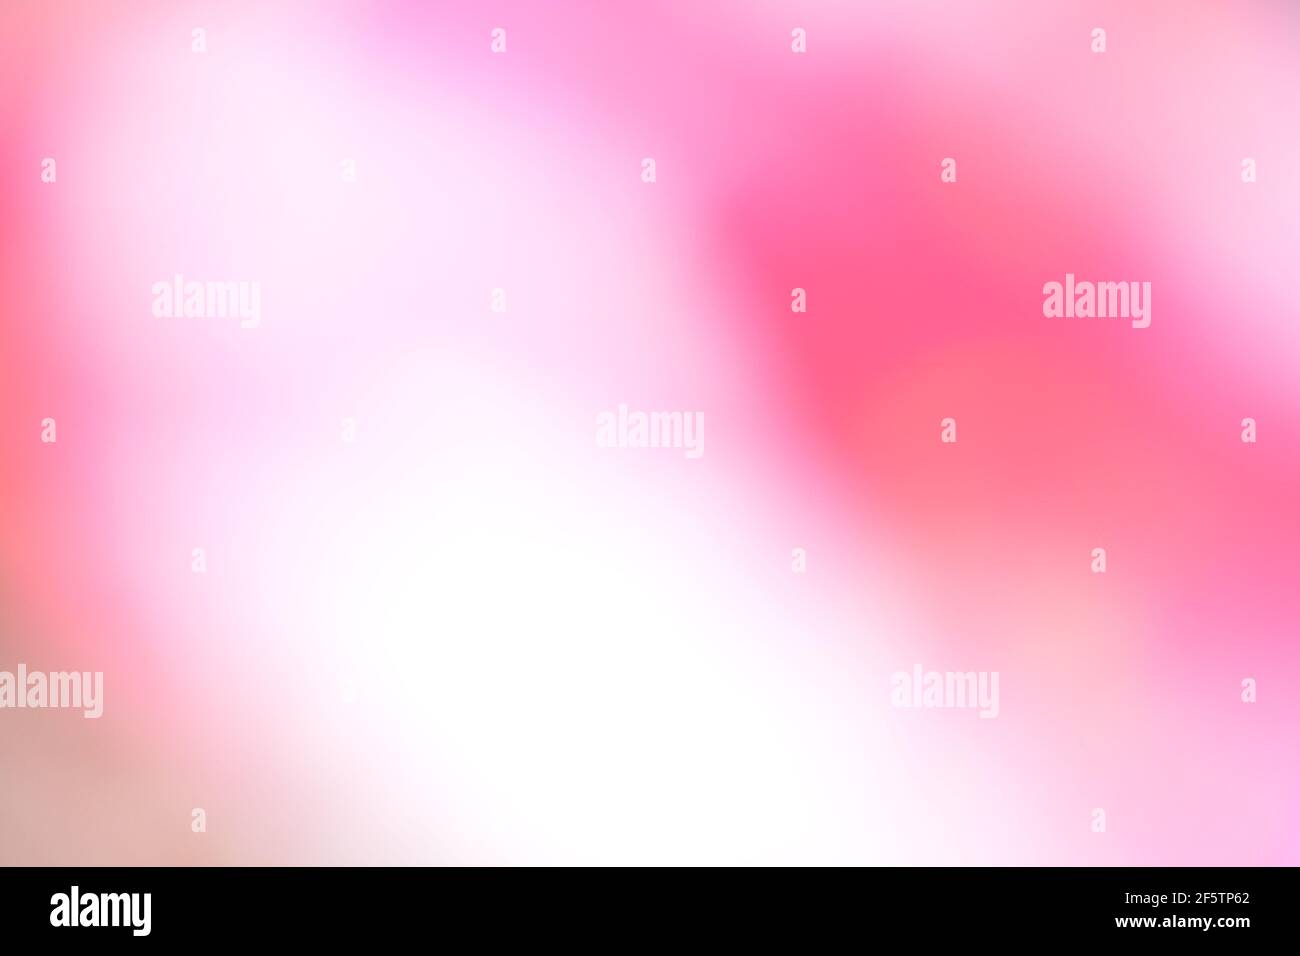 gradient pink and white background for wallpapers and designs, blurred  abstract pink and white gradient pastel light background Stock Photo - Alamy